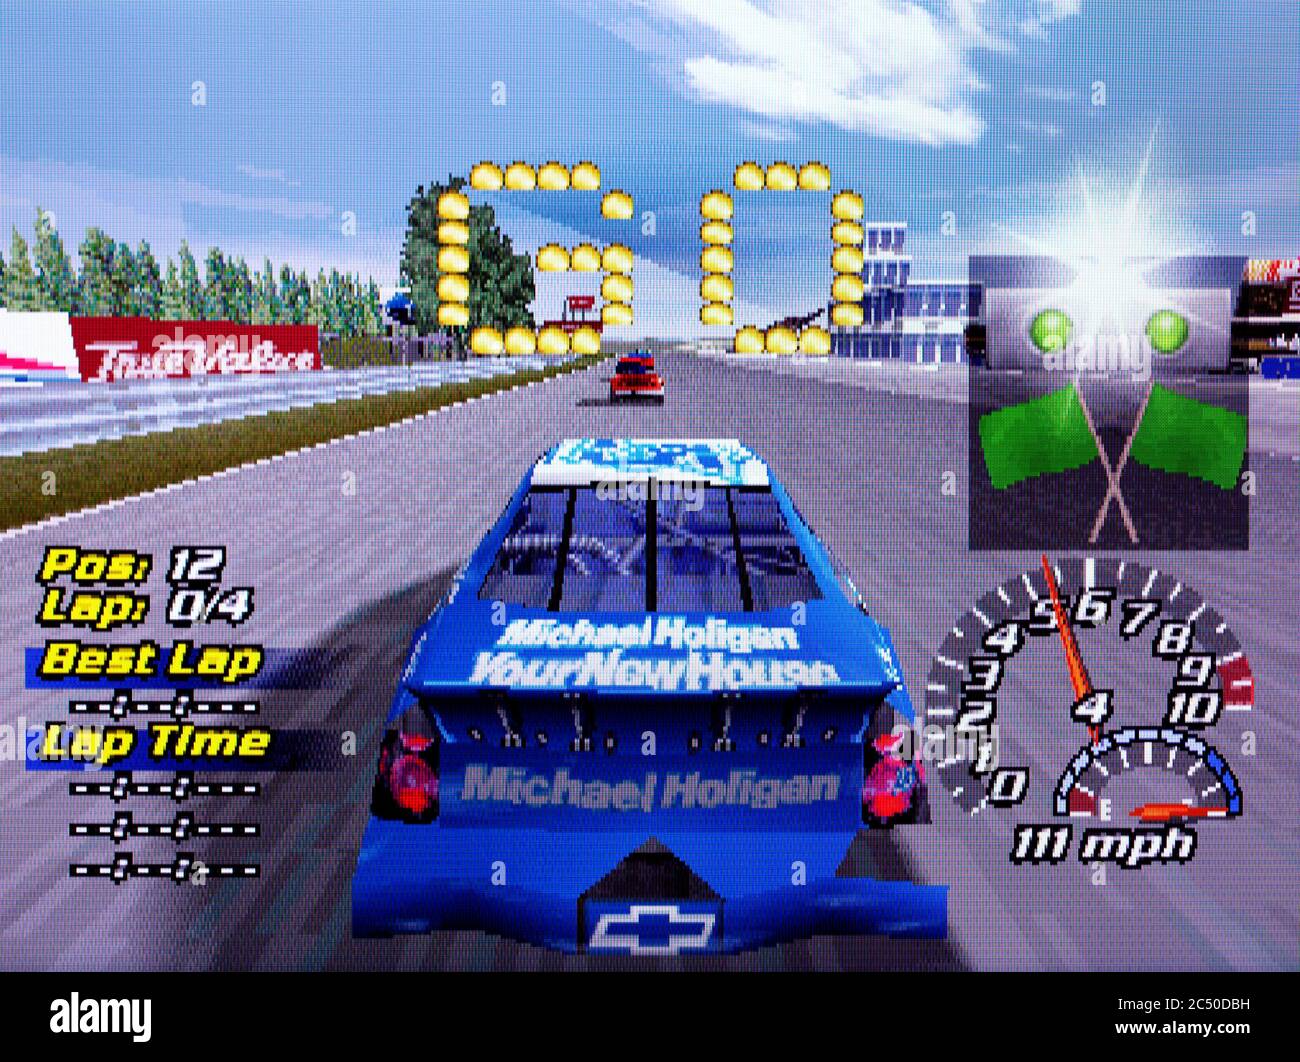 Nascar 2001 - Sony Playstation 1 PS1 PSX - Editorial use only Stock Photo